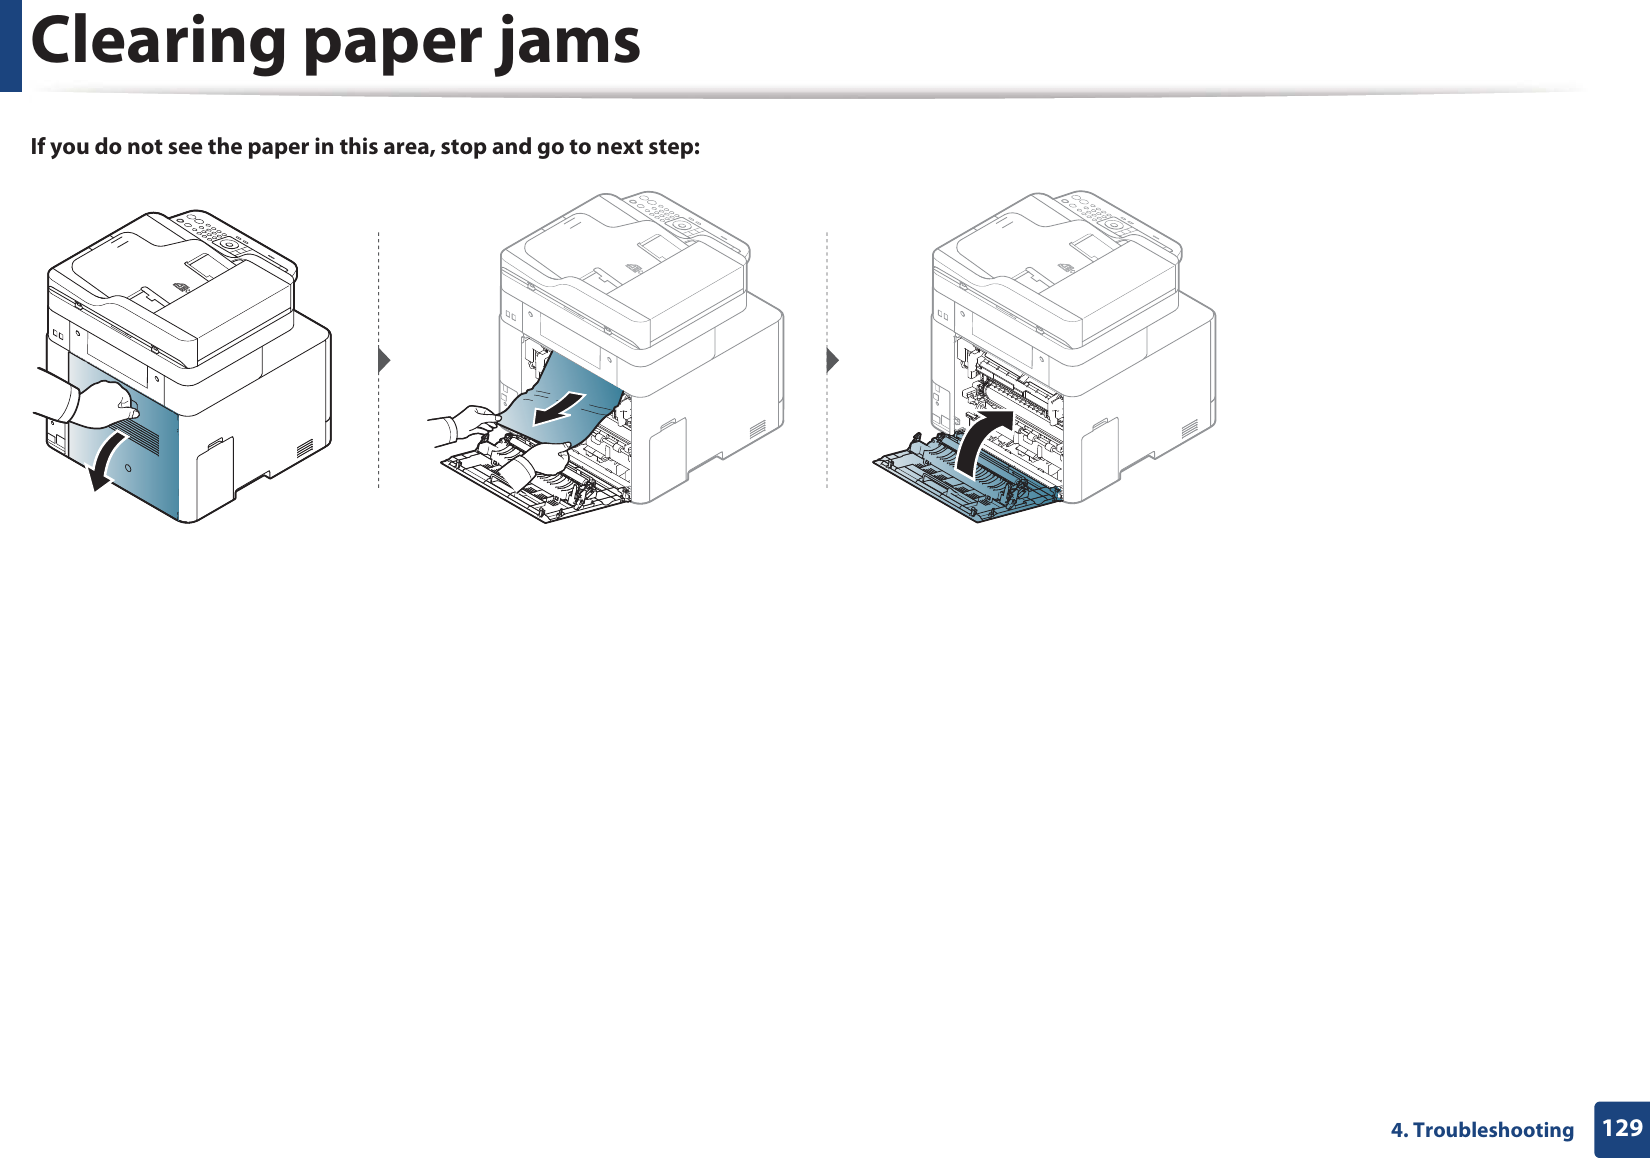 Clearing paper jams1294. TroubleshootingIf you do not see the paper in this area, stop and go to next step: